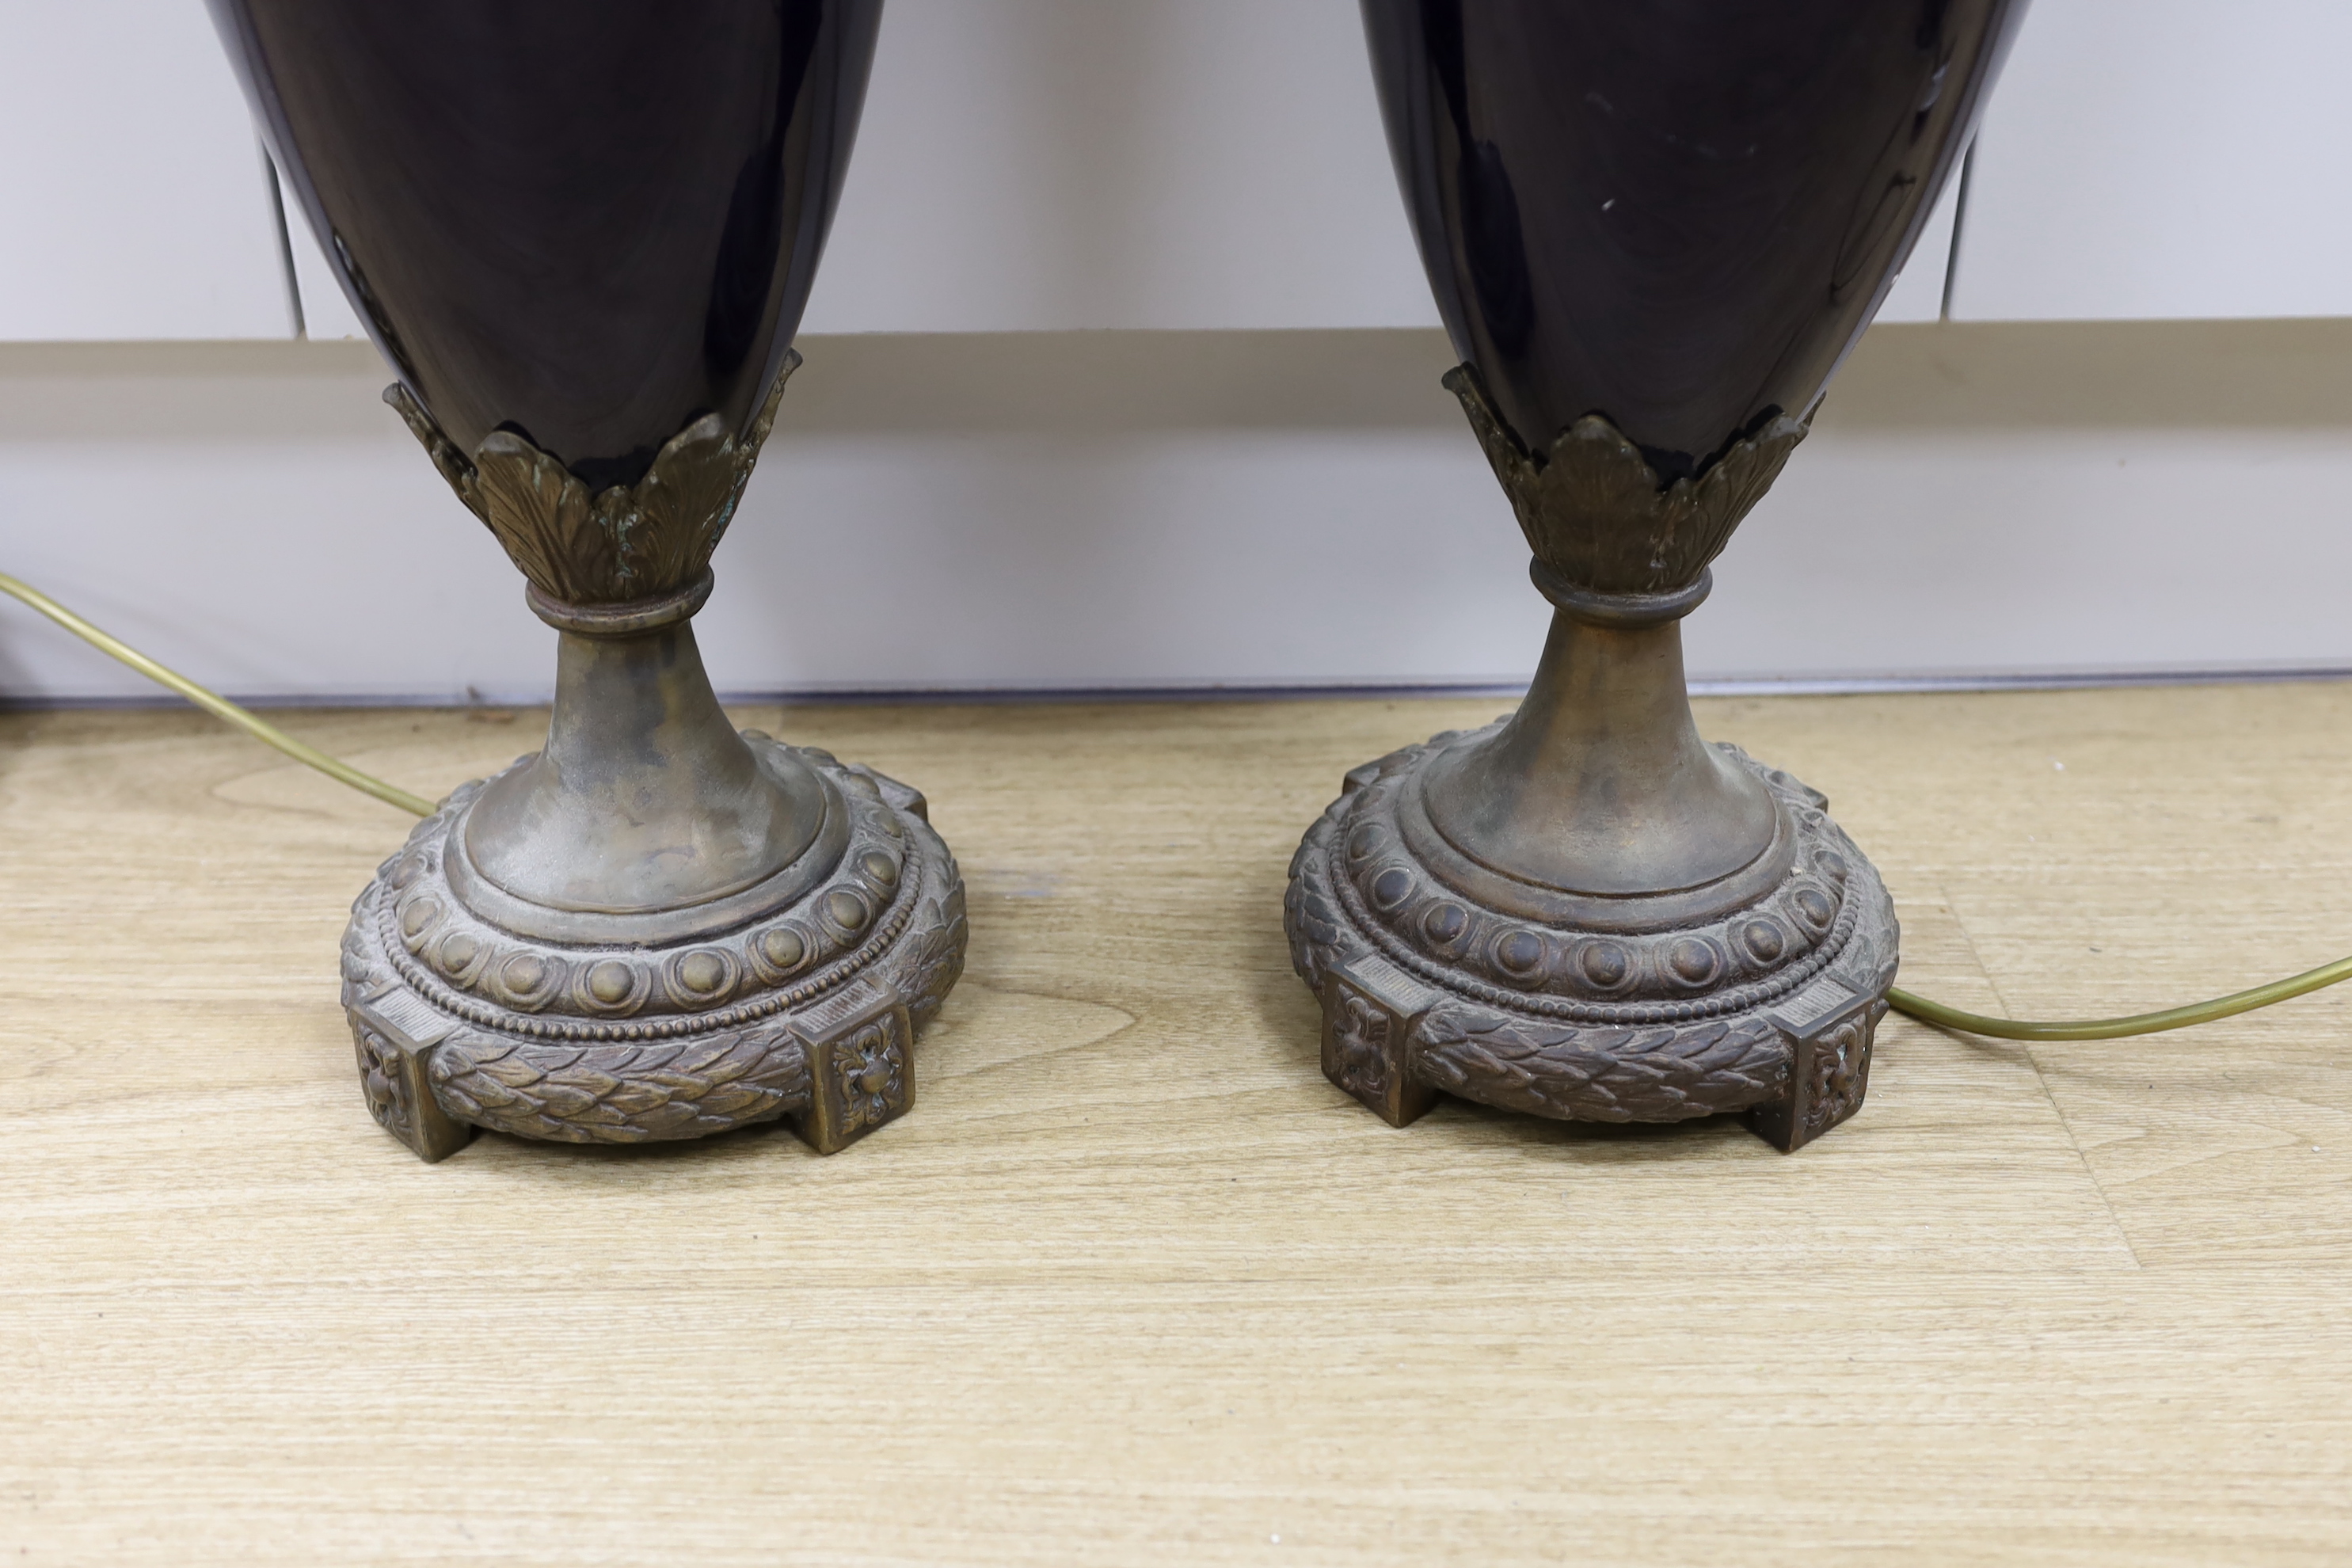 A pair of large Sevres style cobalt blue glazed ceramic lamps with bronzed mounts, 84cm total height